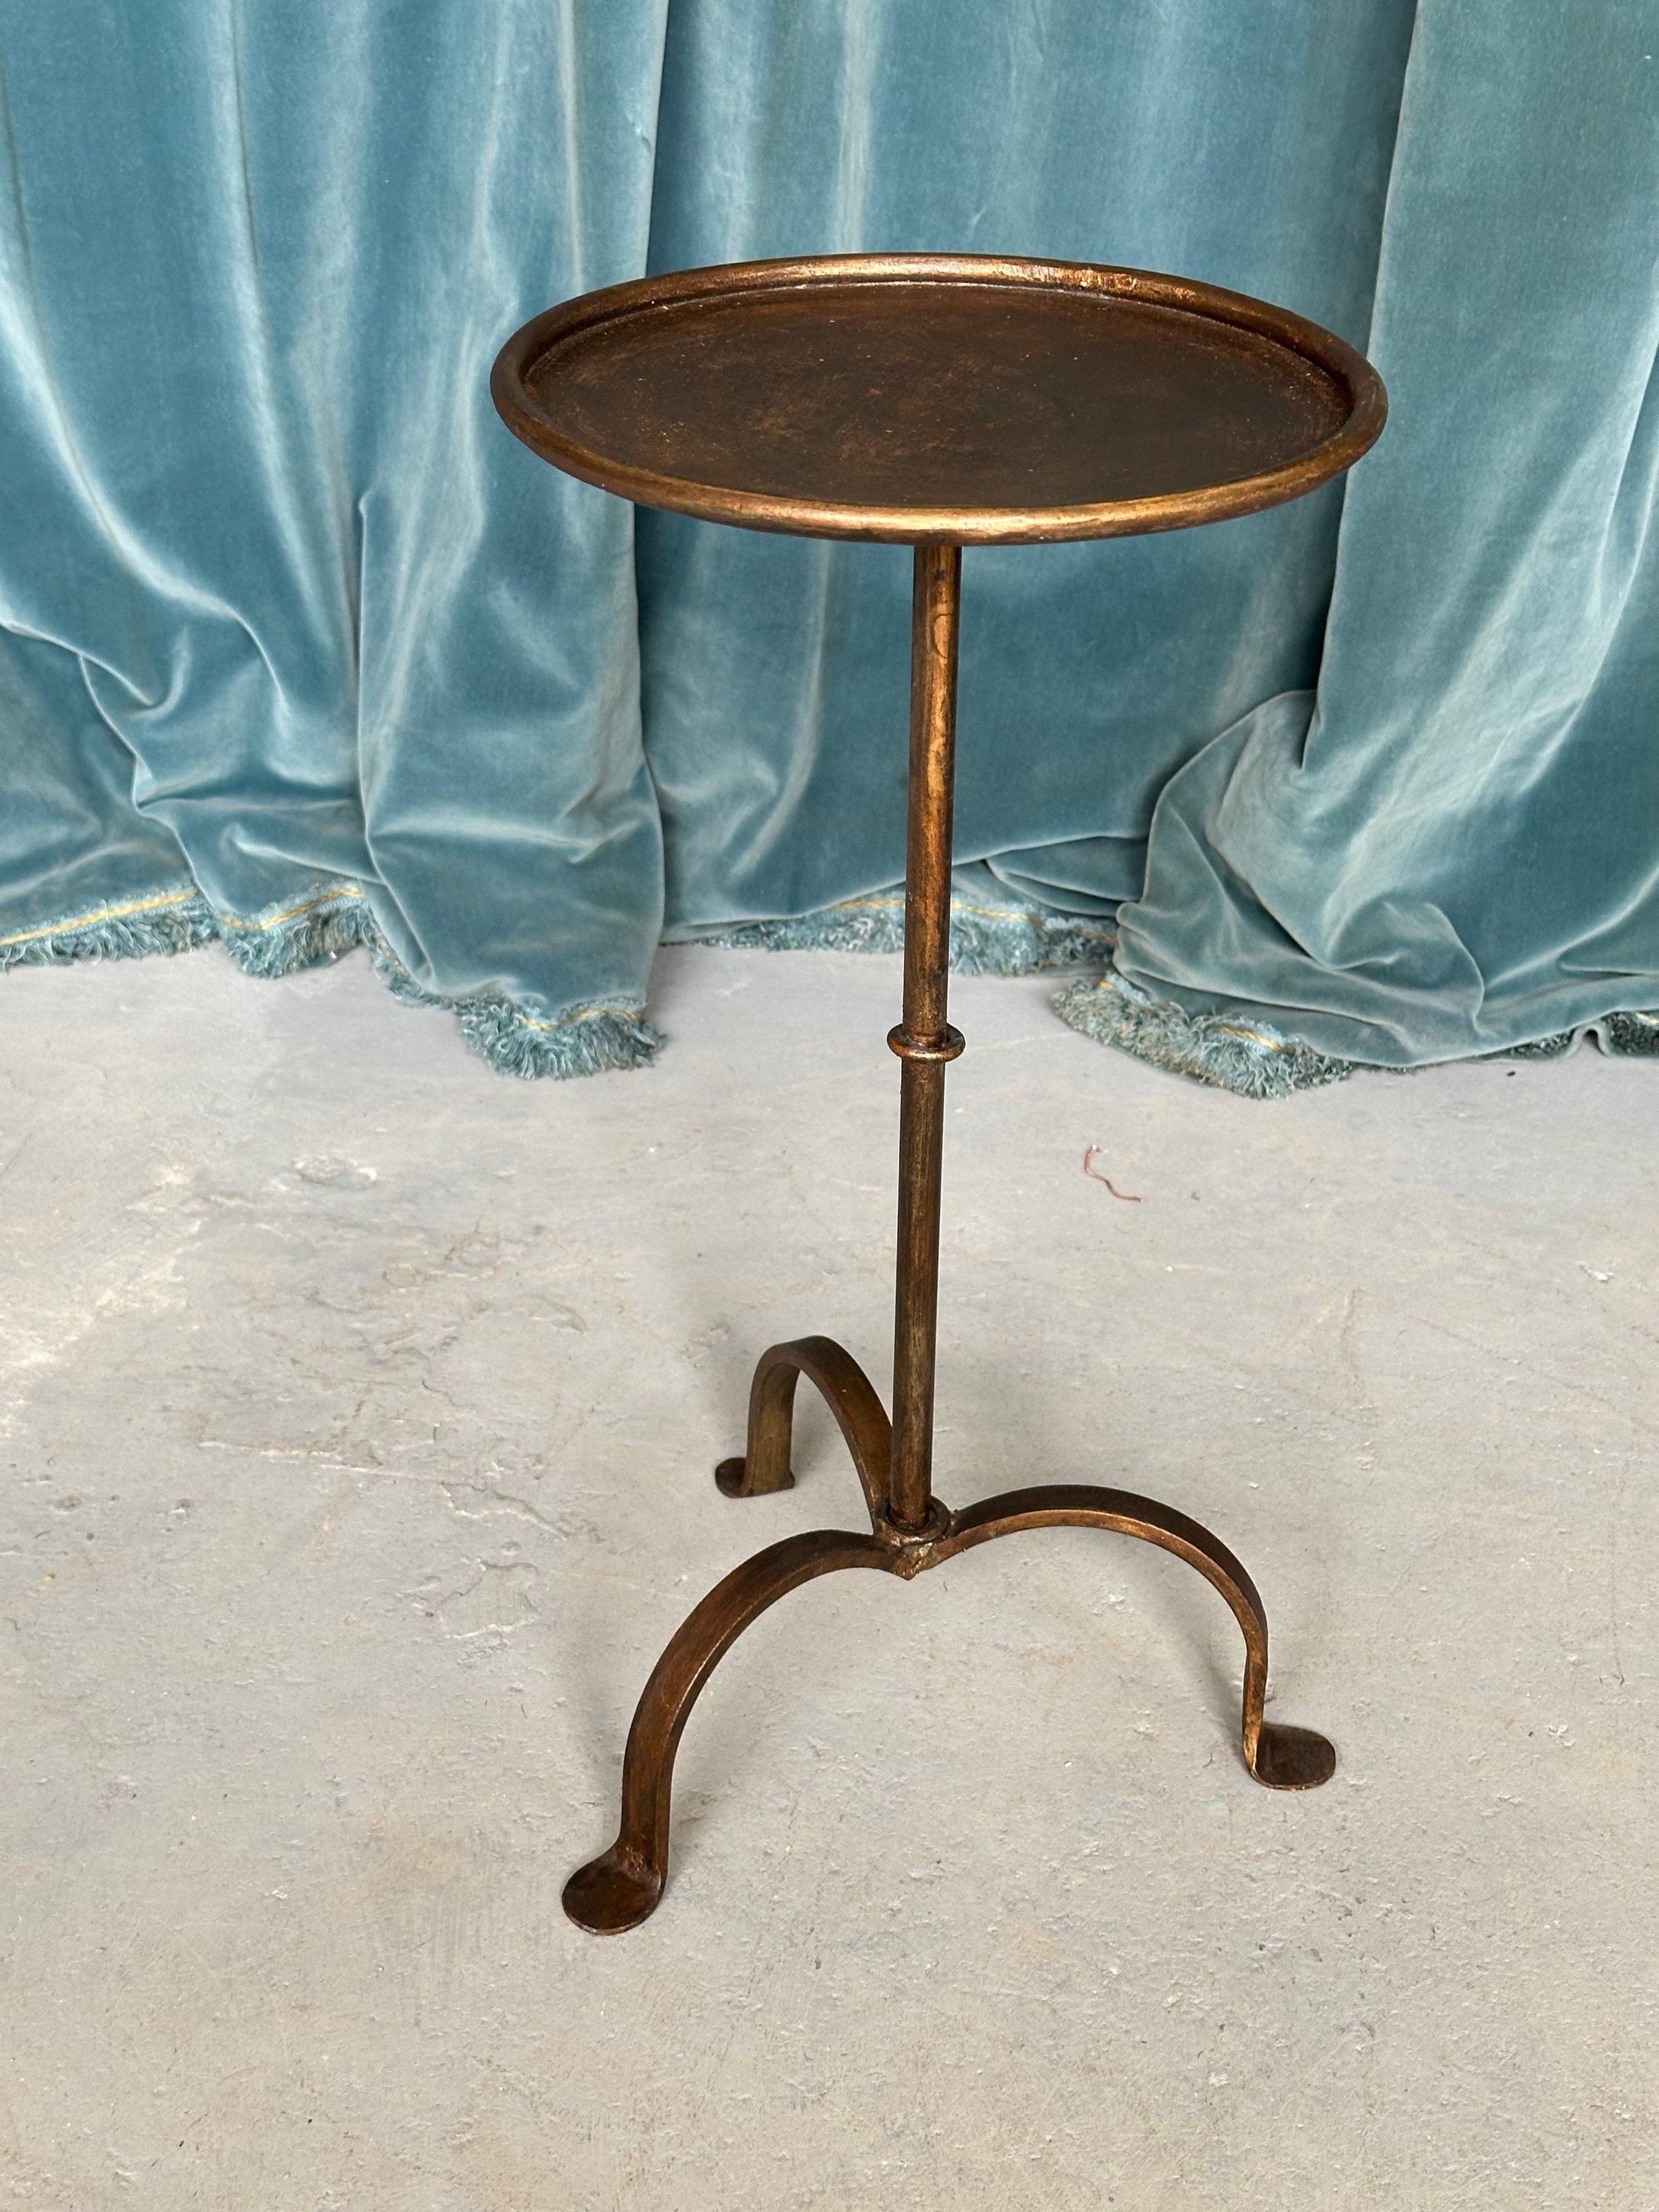 This elegant small end table was recently created by skilled European artisans using traditional iron working techniques. Hand-forged from iron, it features a stem with a central ring detail mounted on a sturdy tripod base with curved legs. A rolled